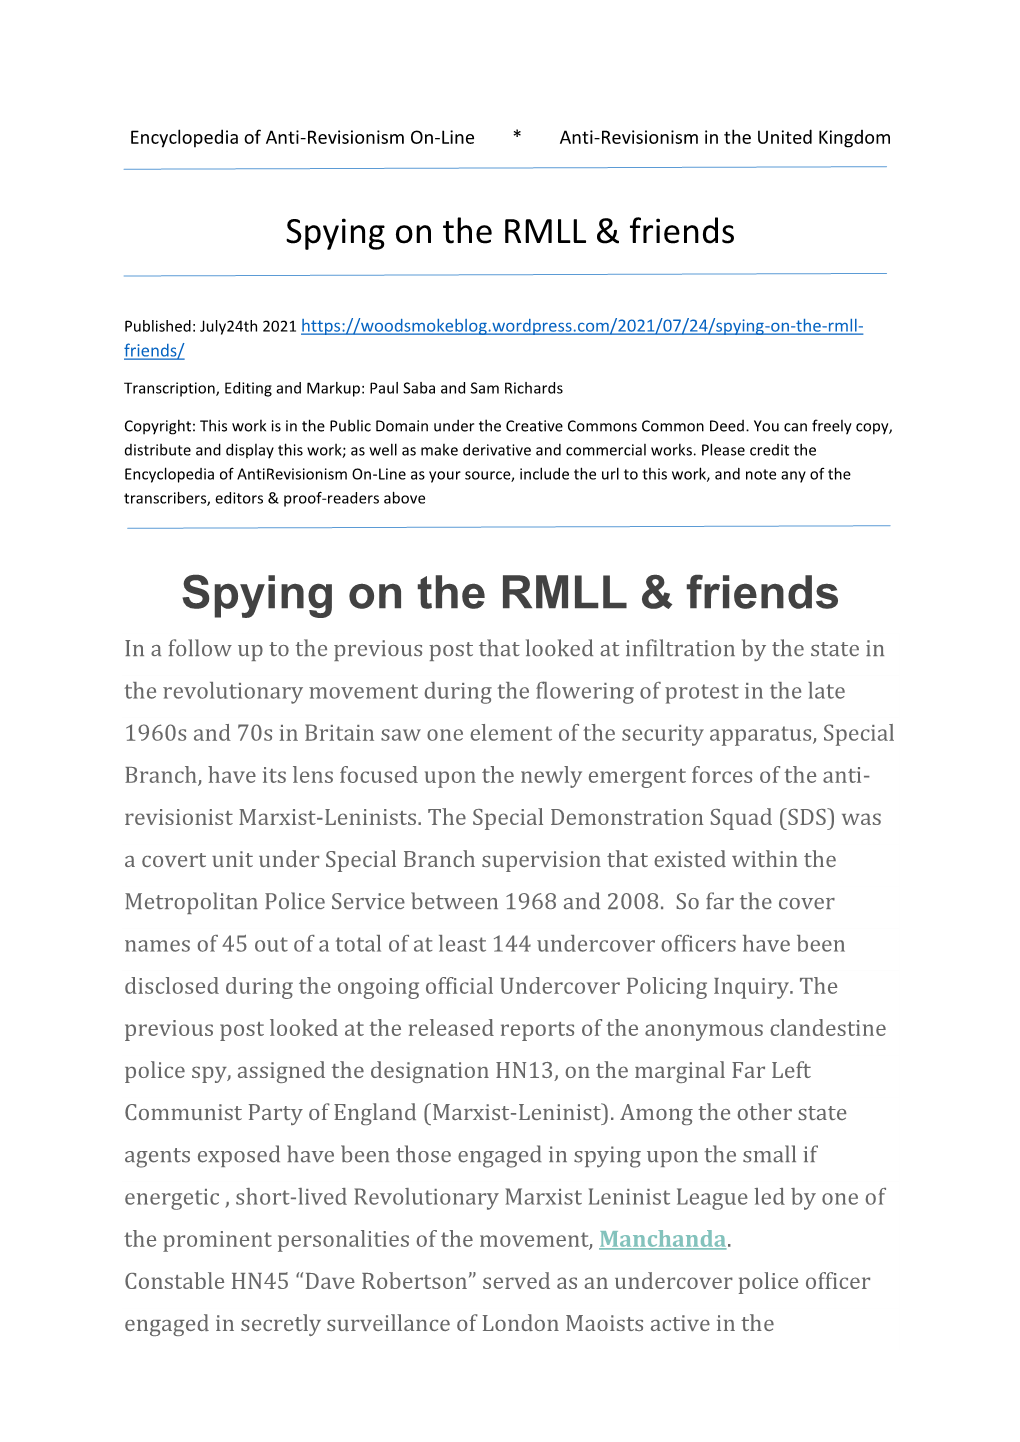 Spying on the RMLL & Friends